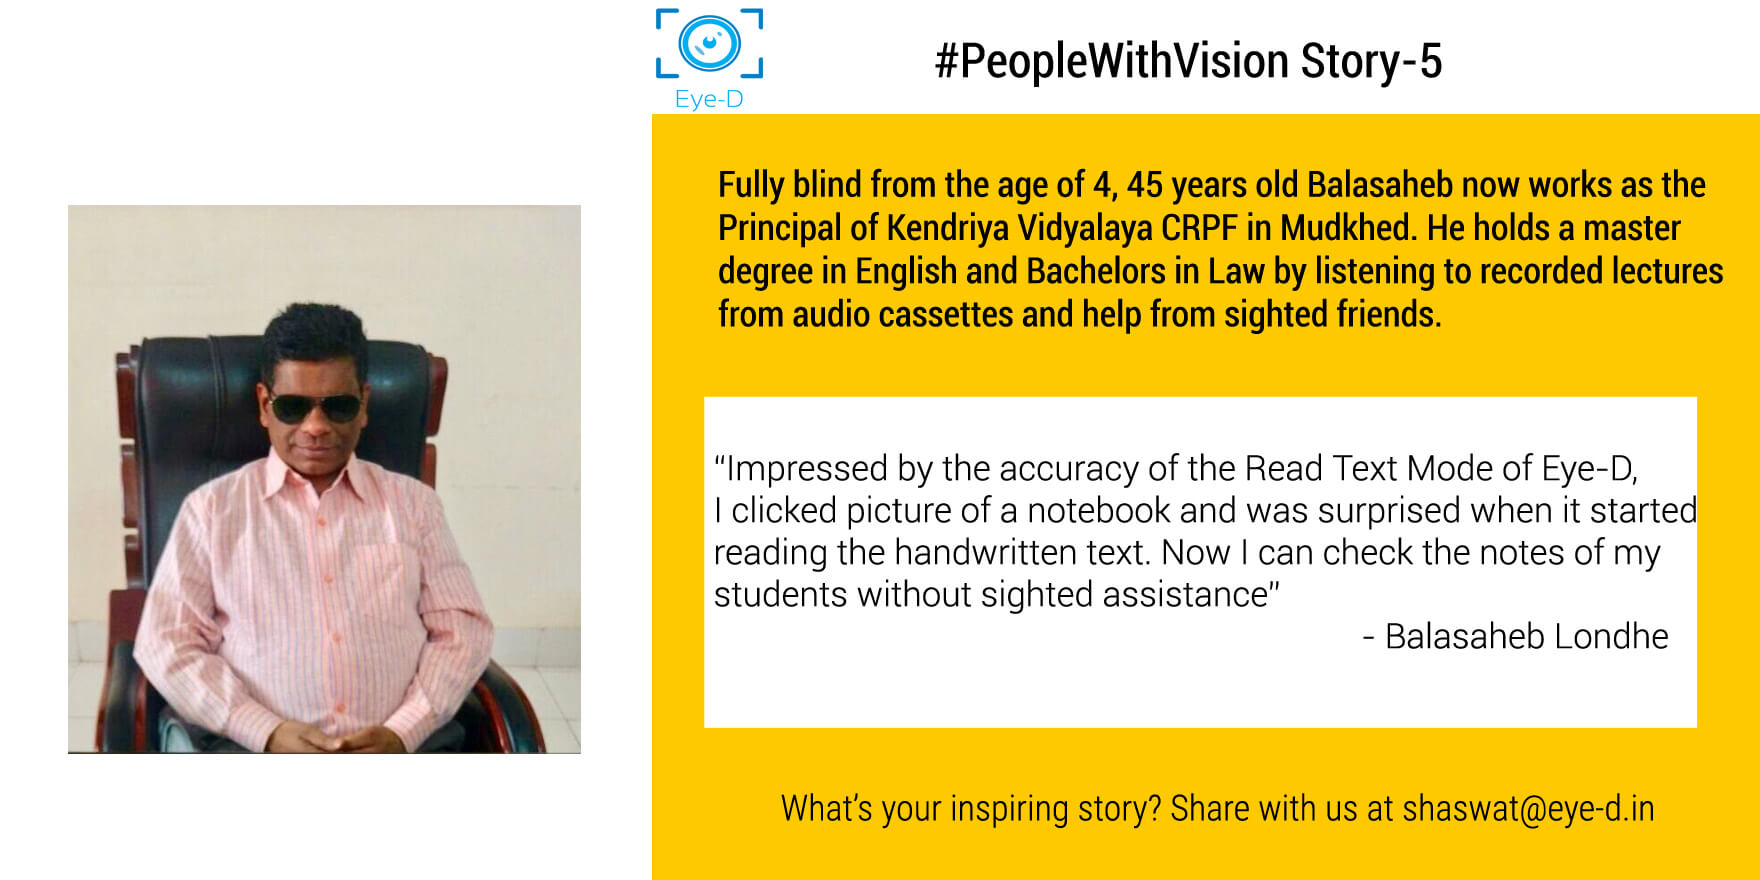 Balasaheb's PeopleWithVision Story shows how he managed to establish himself as the principal of Central School irrespective of being blind at the age of 4. It also mentions one his memorable of using Eye-D to read handwritten text of from the notebook of his students.